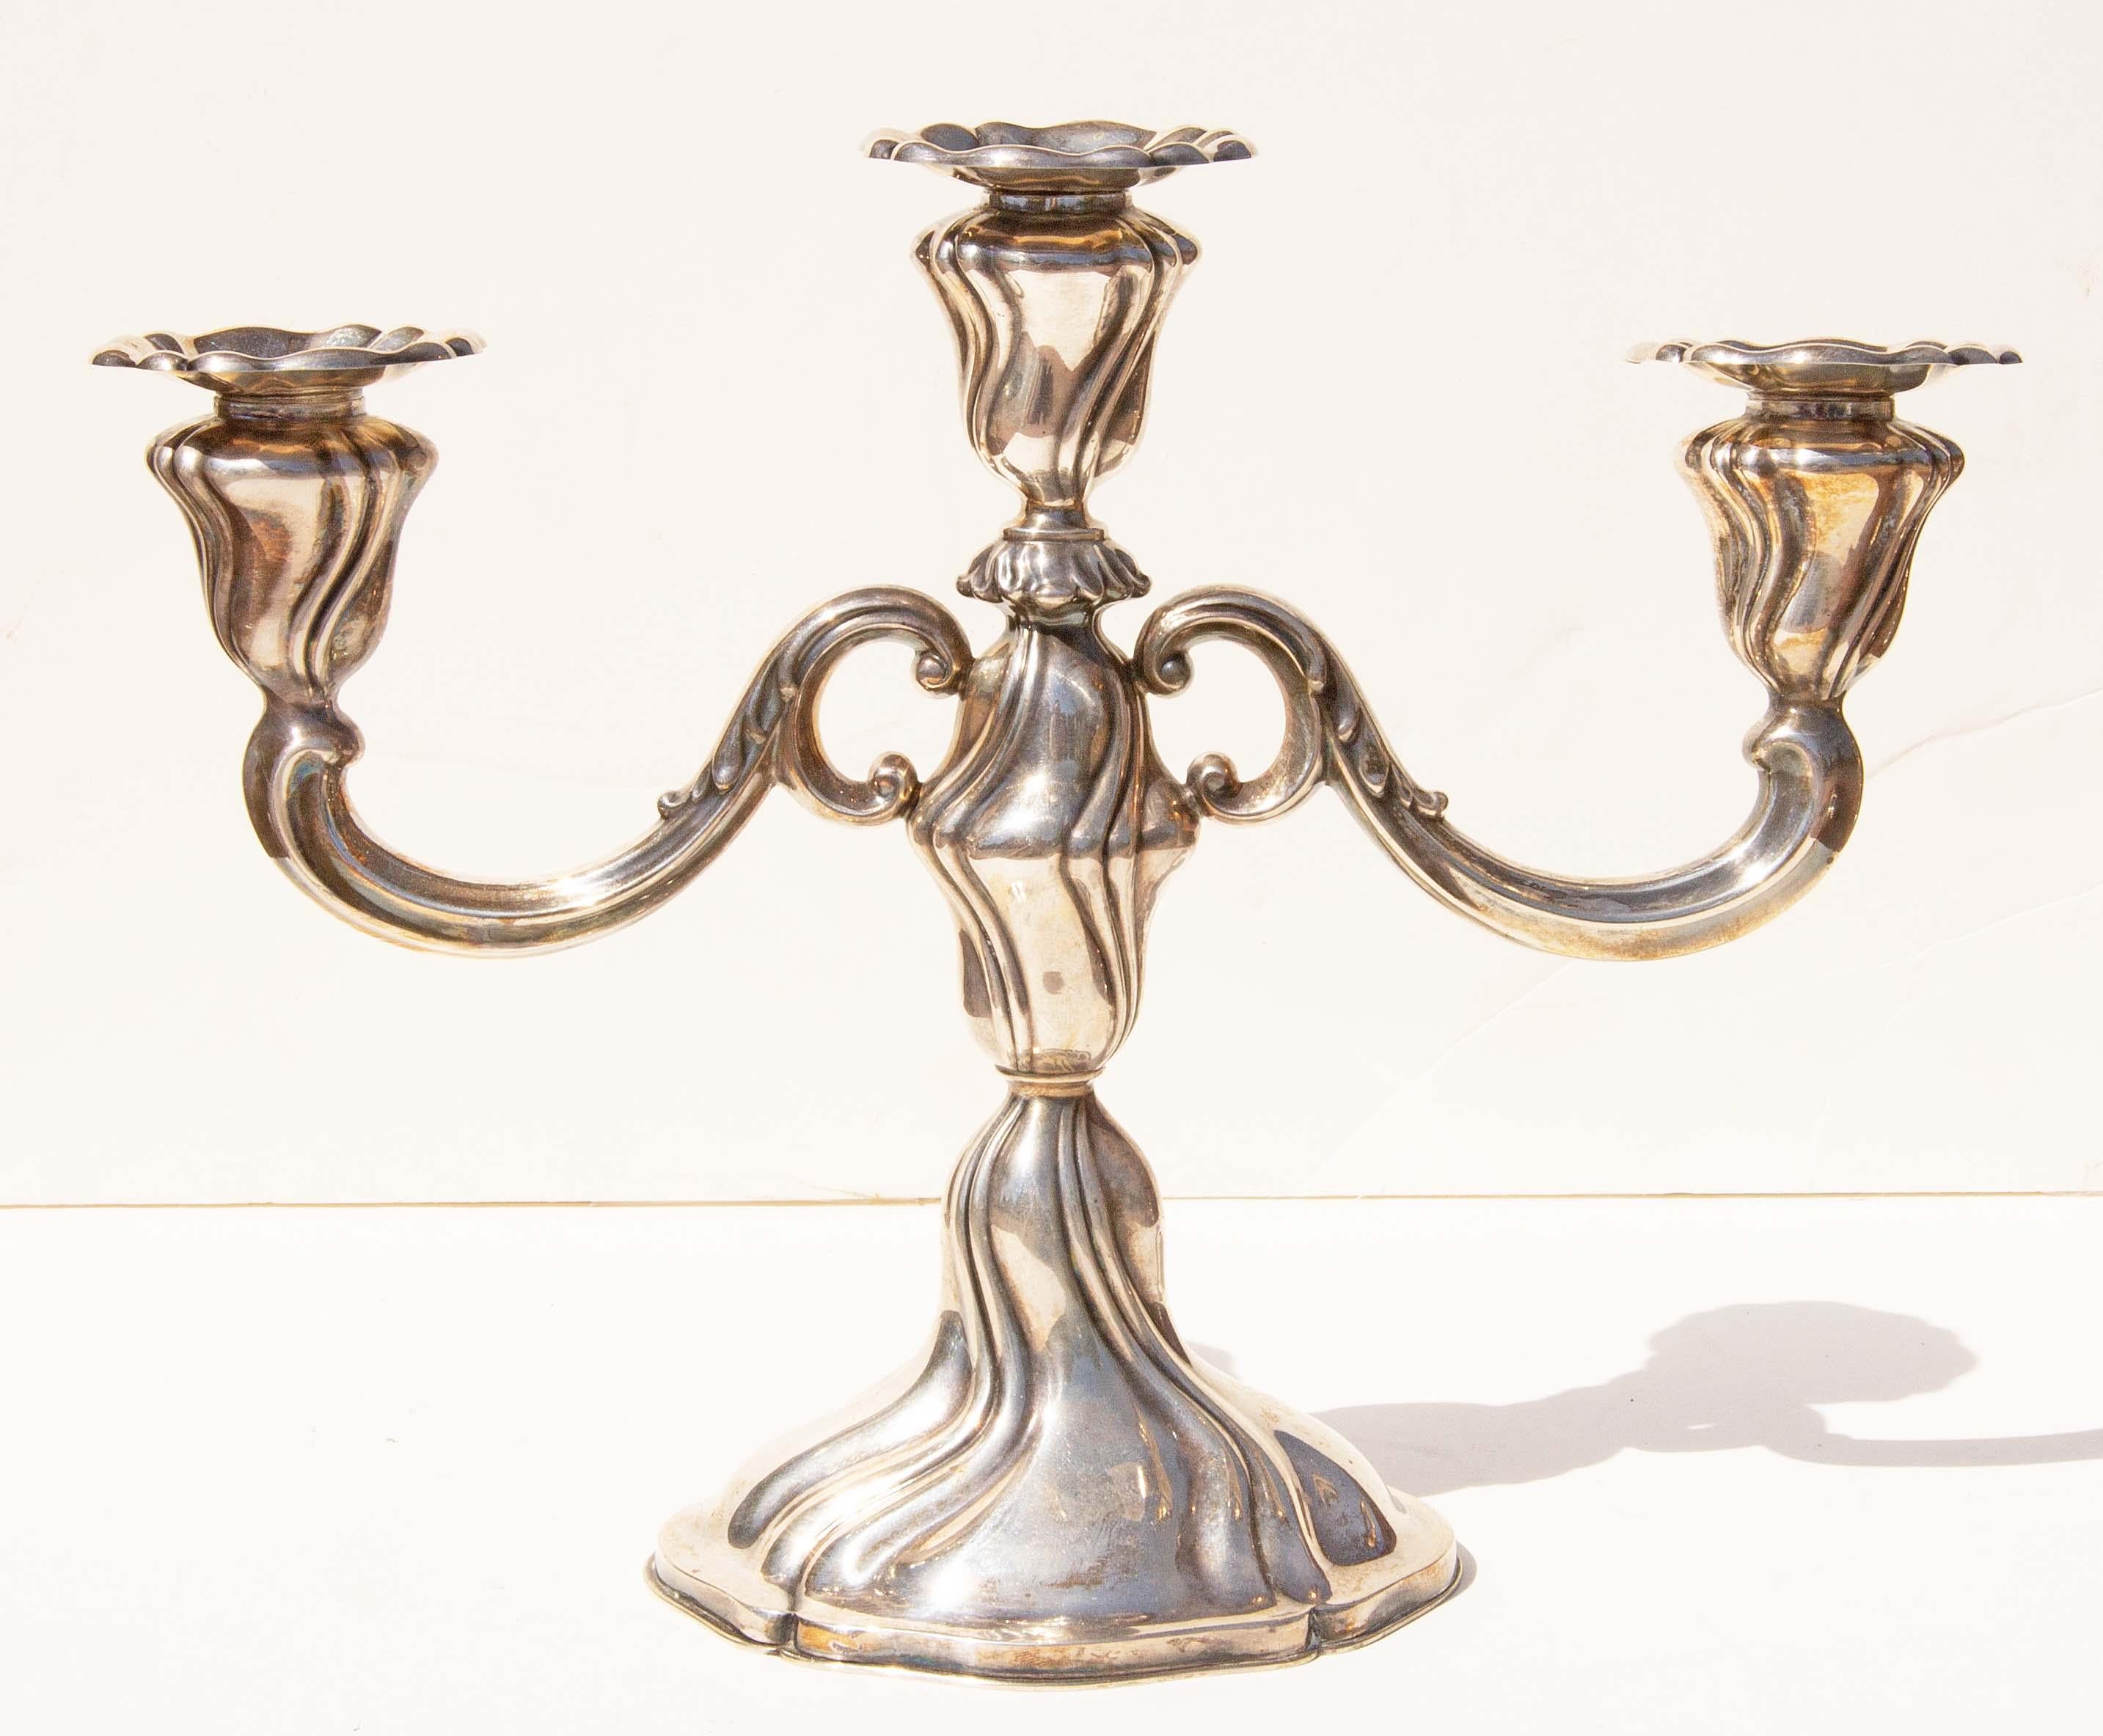 Pair of antique .835 silver candelabra, German, early 20th century. Good condition. Not weighted. Need some polishing.